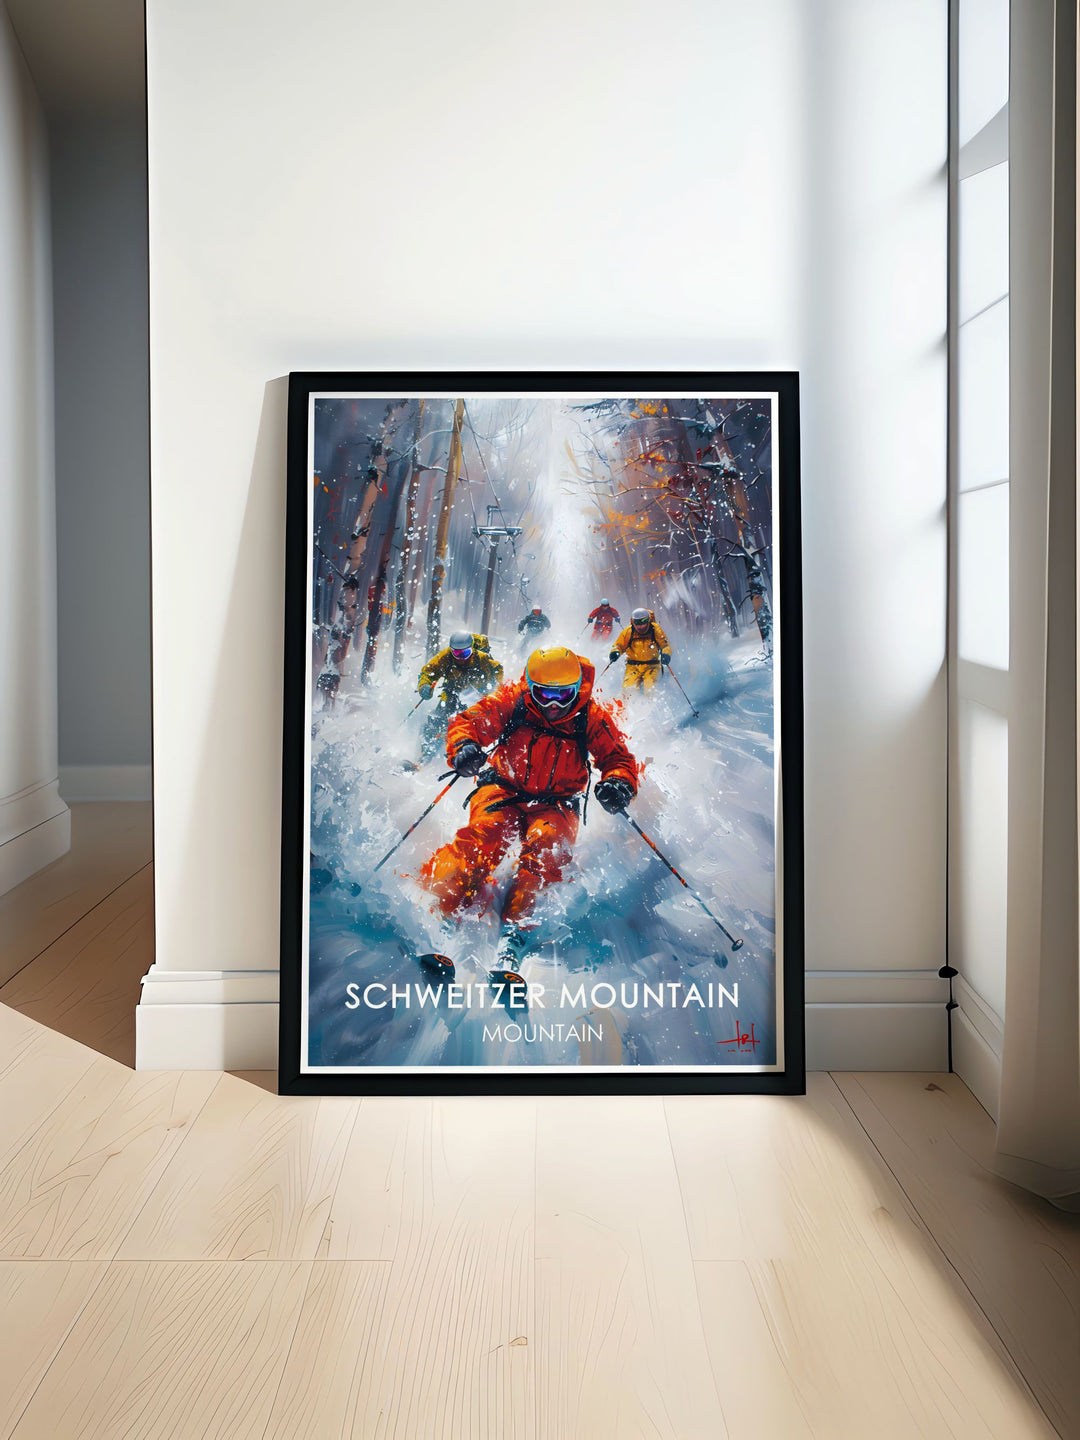 Vintage ski poster featuring Schweitzer Mountain, depicting the exhilarating ski slopes and breathtaking views, a must have for winter sports fans and vintage art collectors.